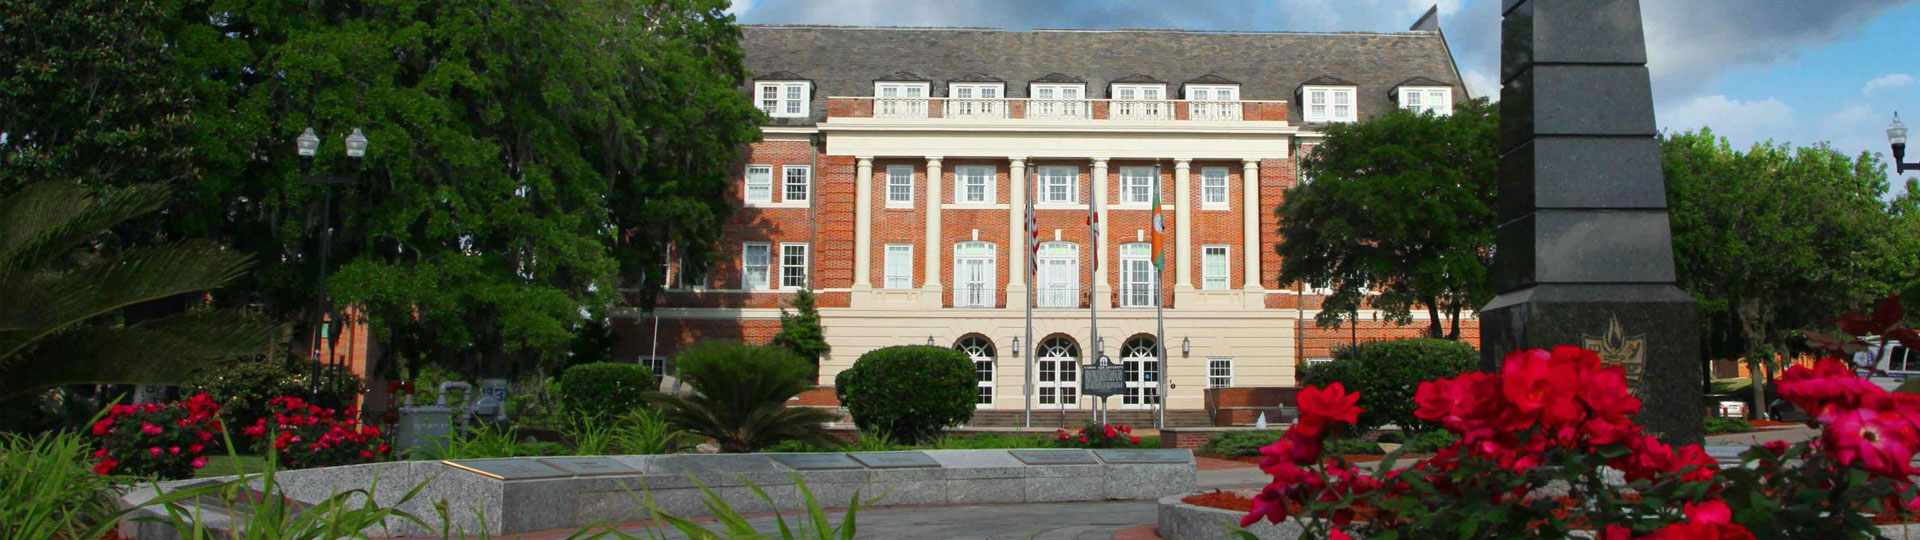 FAMU front of building